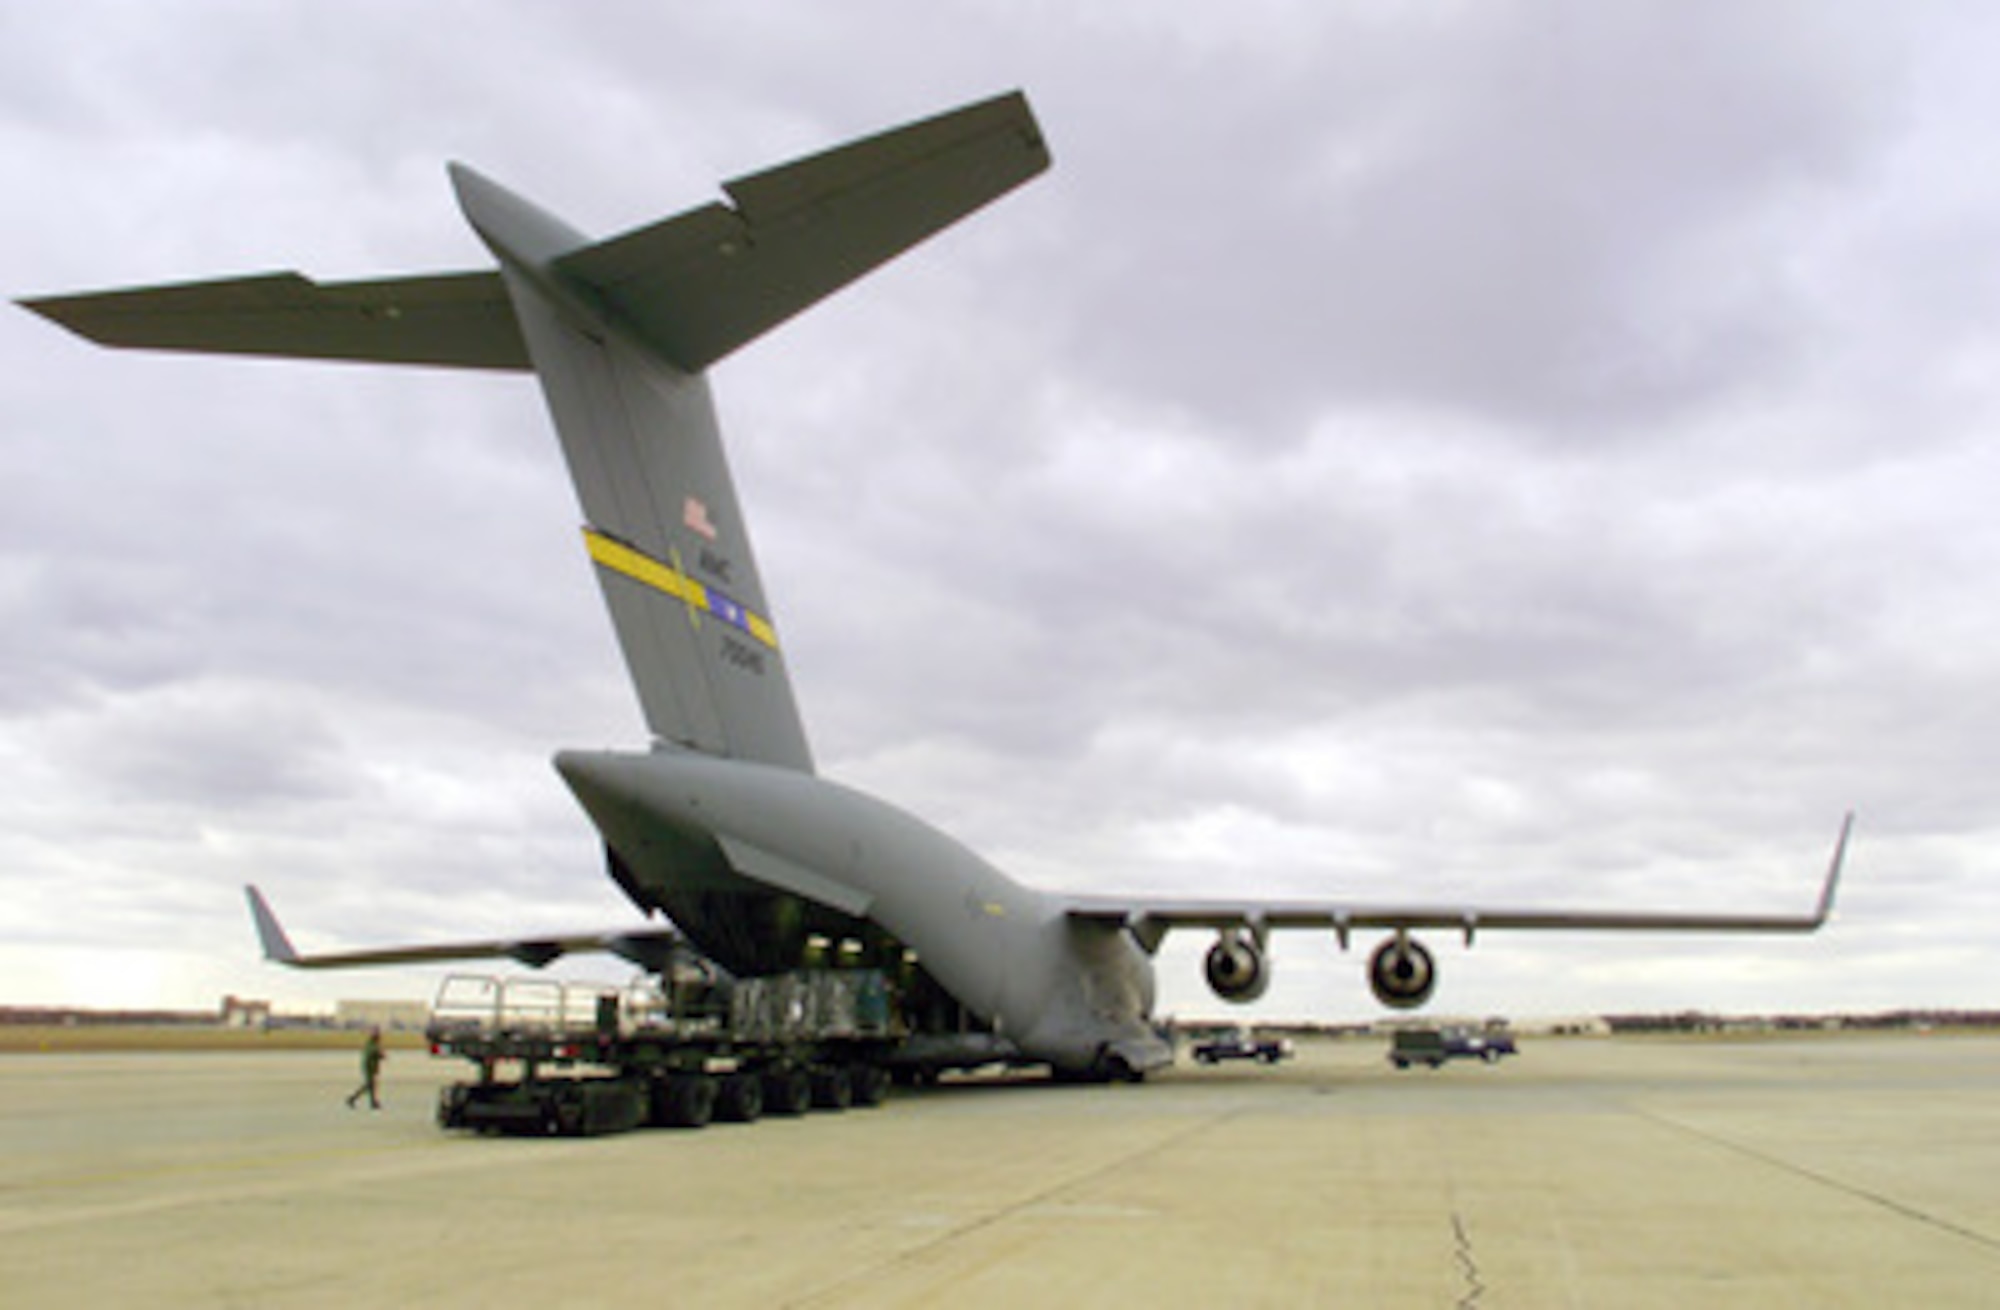 Pallets of cargo are loaded aboard a U.S. Air Force C-17 Globemaster III at McGuire Air Force, N.J., on March 2, 2000. The aircraft is en route to South Africa as part of Operation Atlas Response. Atlas Response is the U.S. military's contribution to relief efforts following torrential rains and flooding in southern Mozambique and South Africa. About 30 airmen from the 621st Air Mobility Operations Group are deploying to South Africa to set up and maintain airfield operations for the humanitarian operation. 